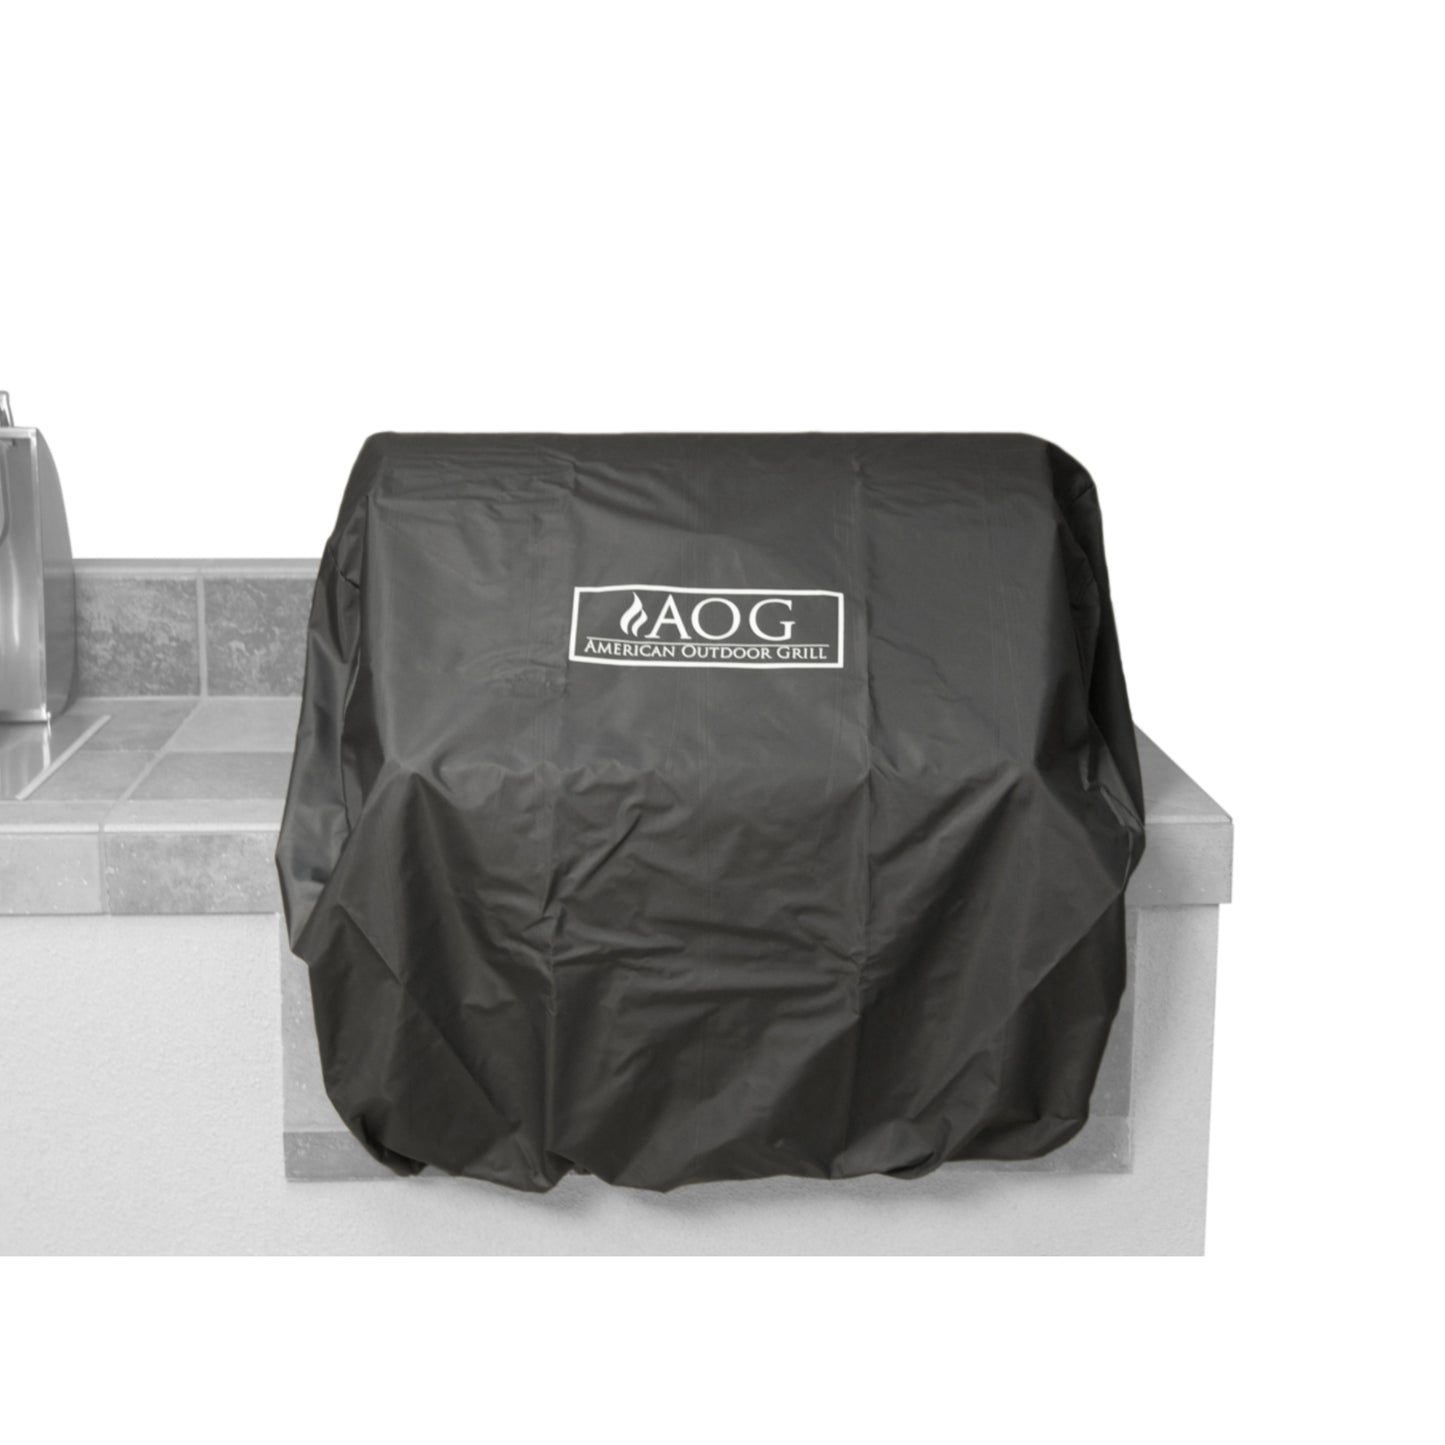 36" American Outdoor Grill (AOG) Grill Cover, Built-In CB36-D